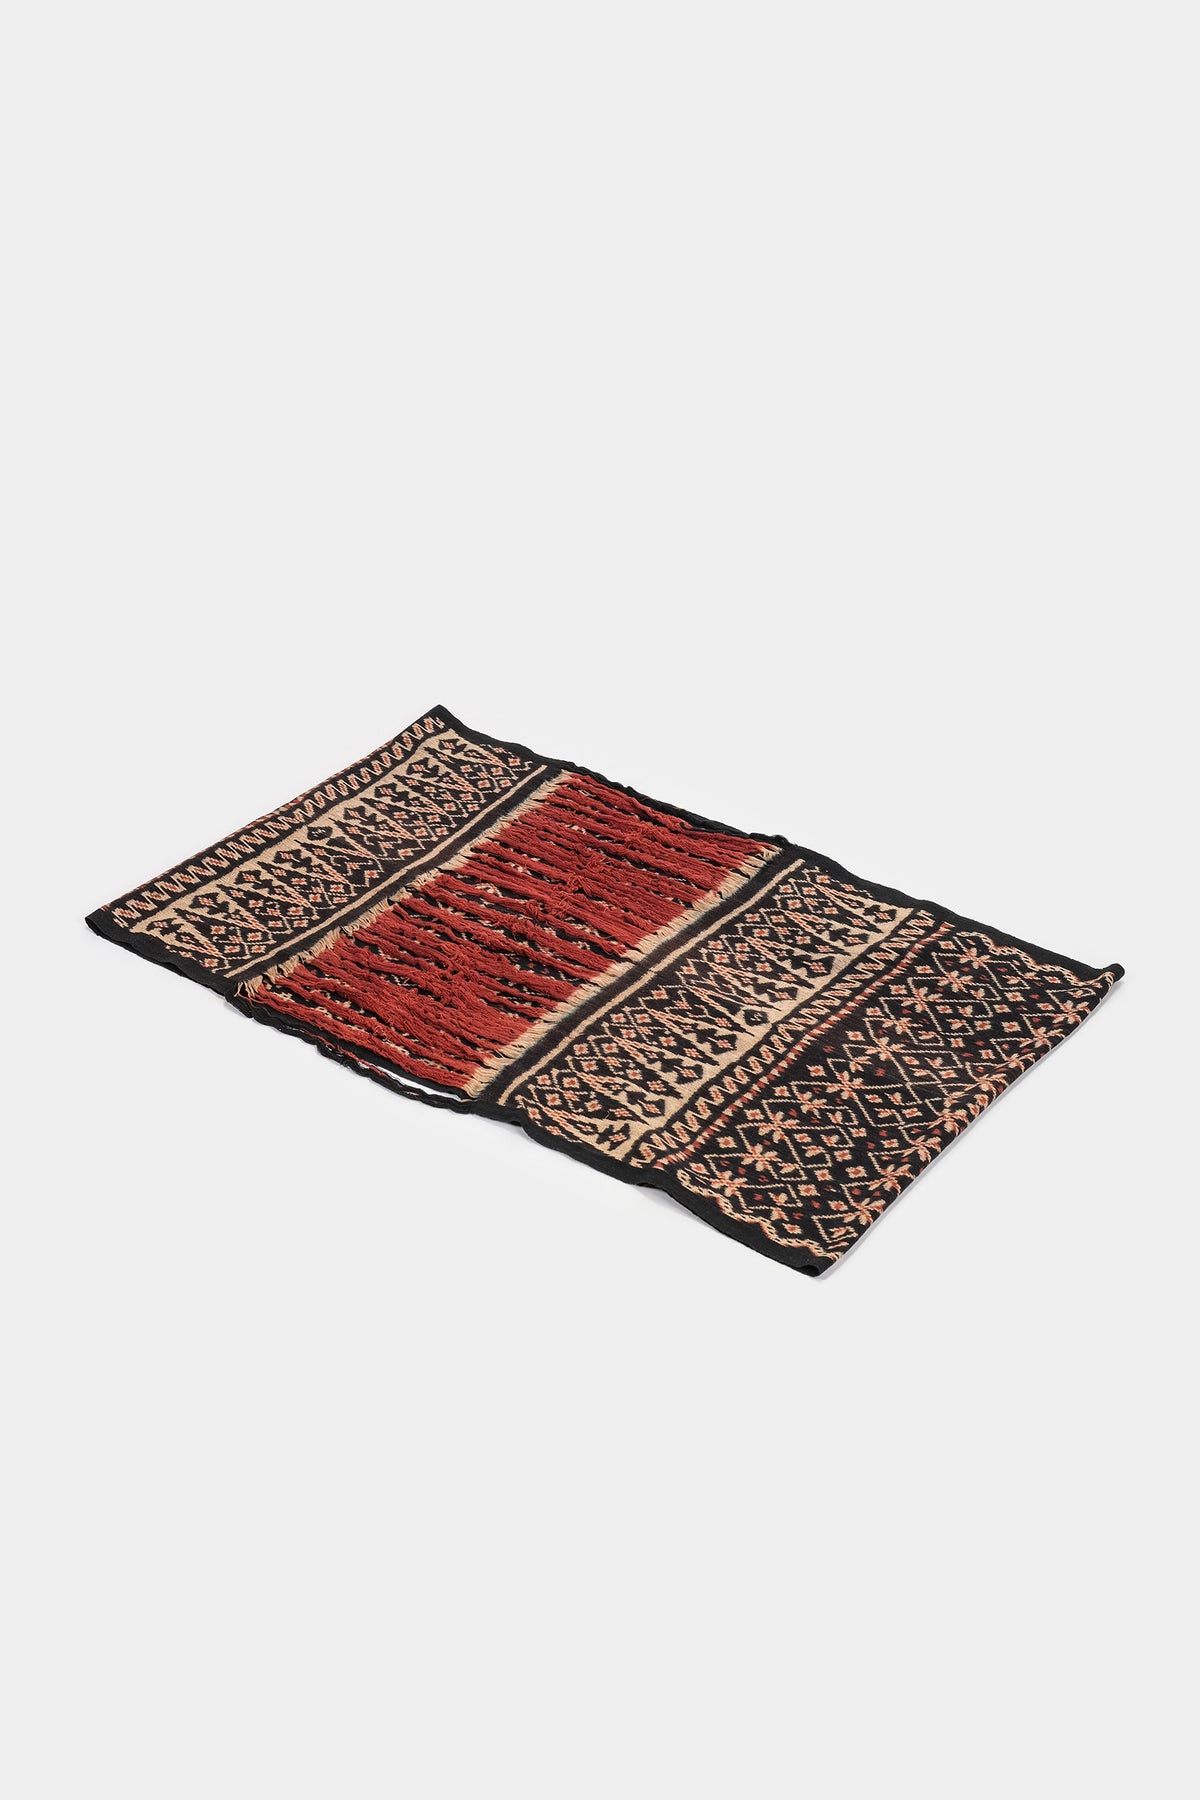 Indonesian Slendon chest-cloth, woven, 1900